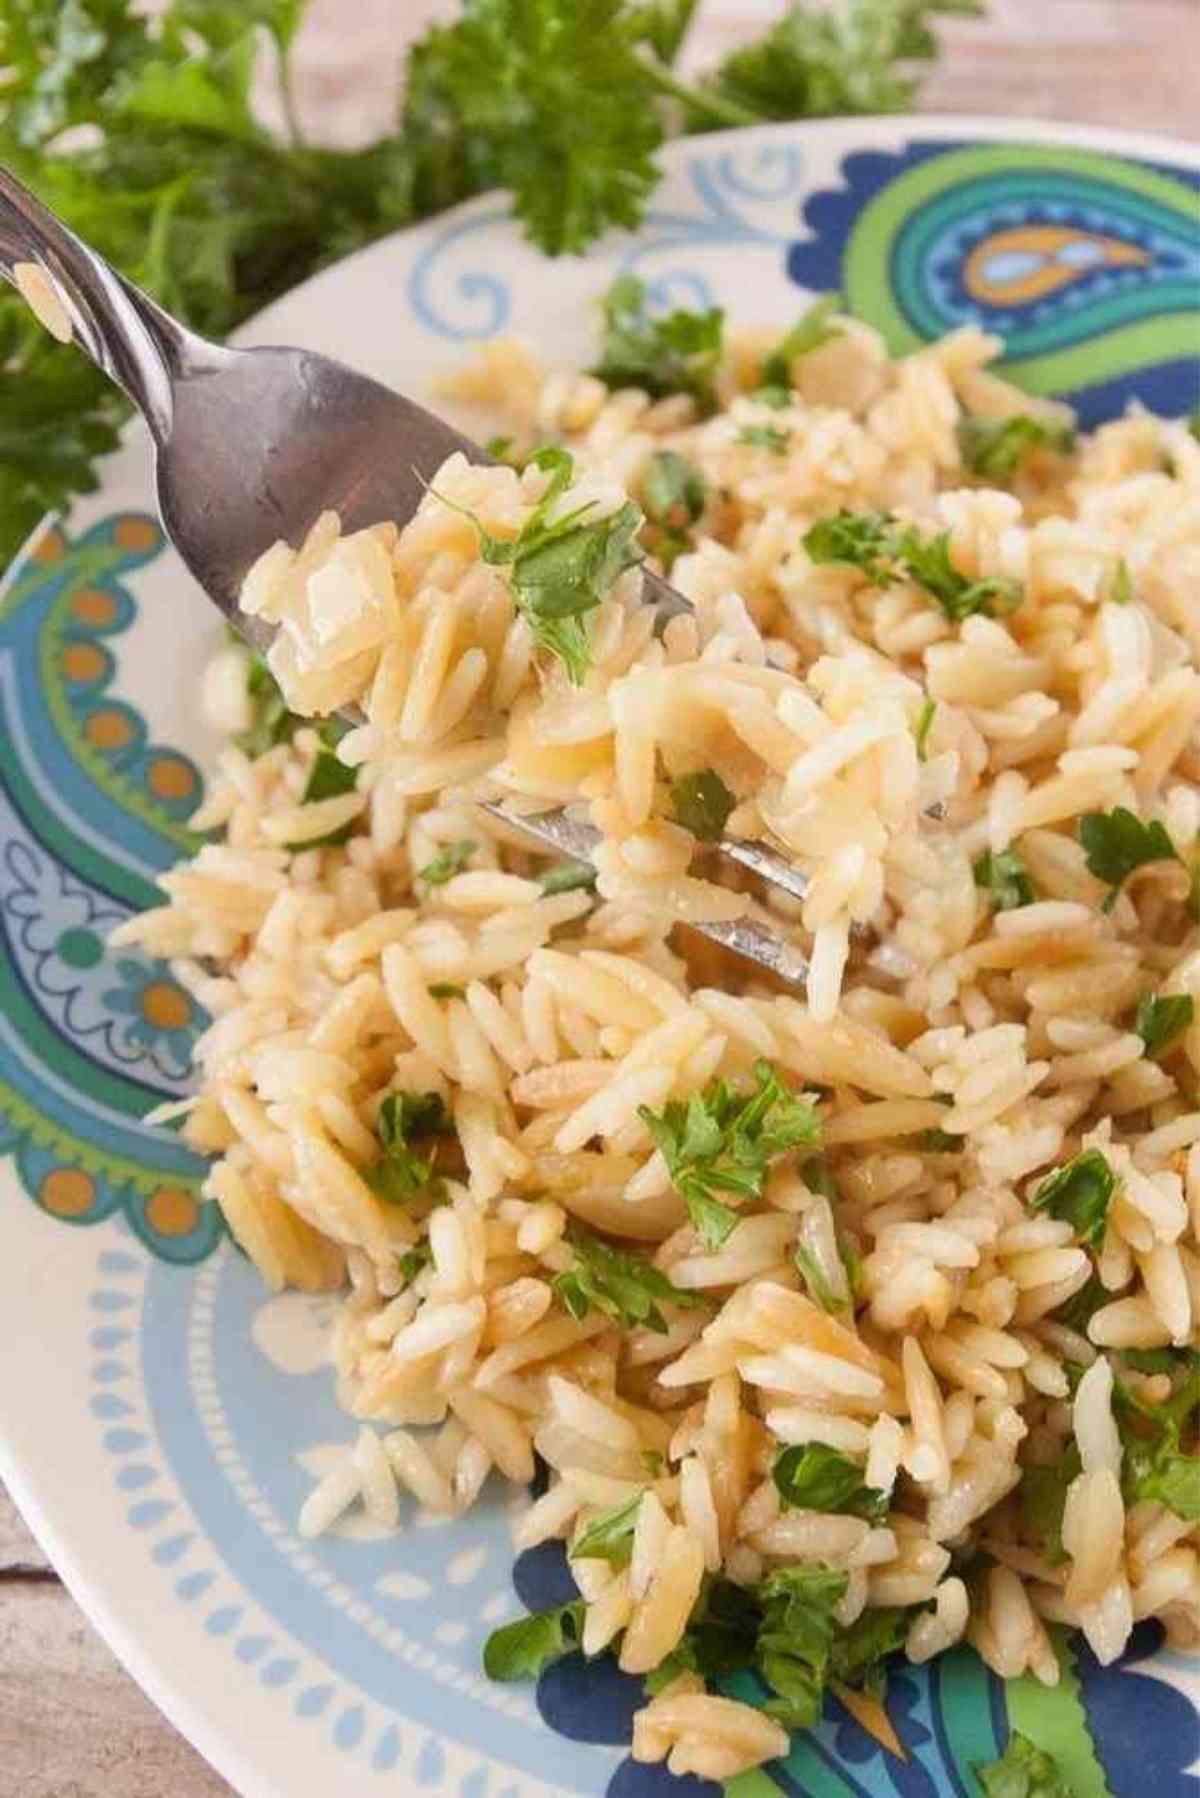 A forkful of orzo rice pilaf sprinkled with fresh parsley.